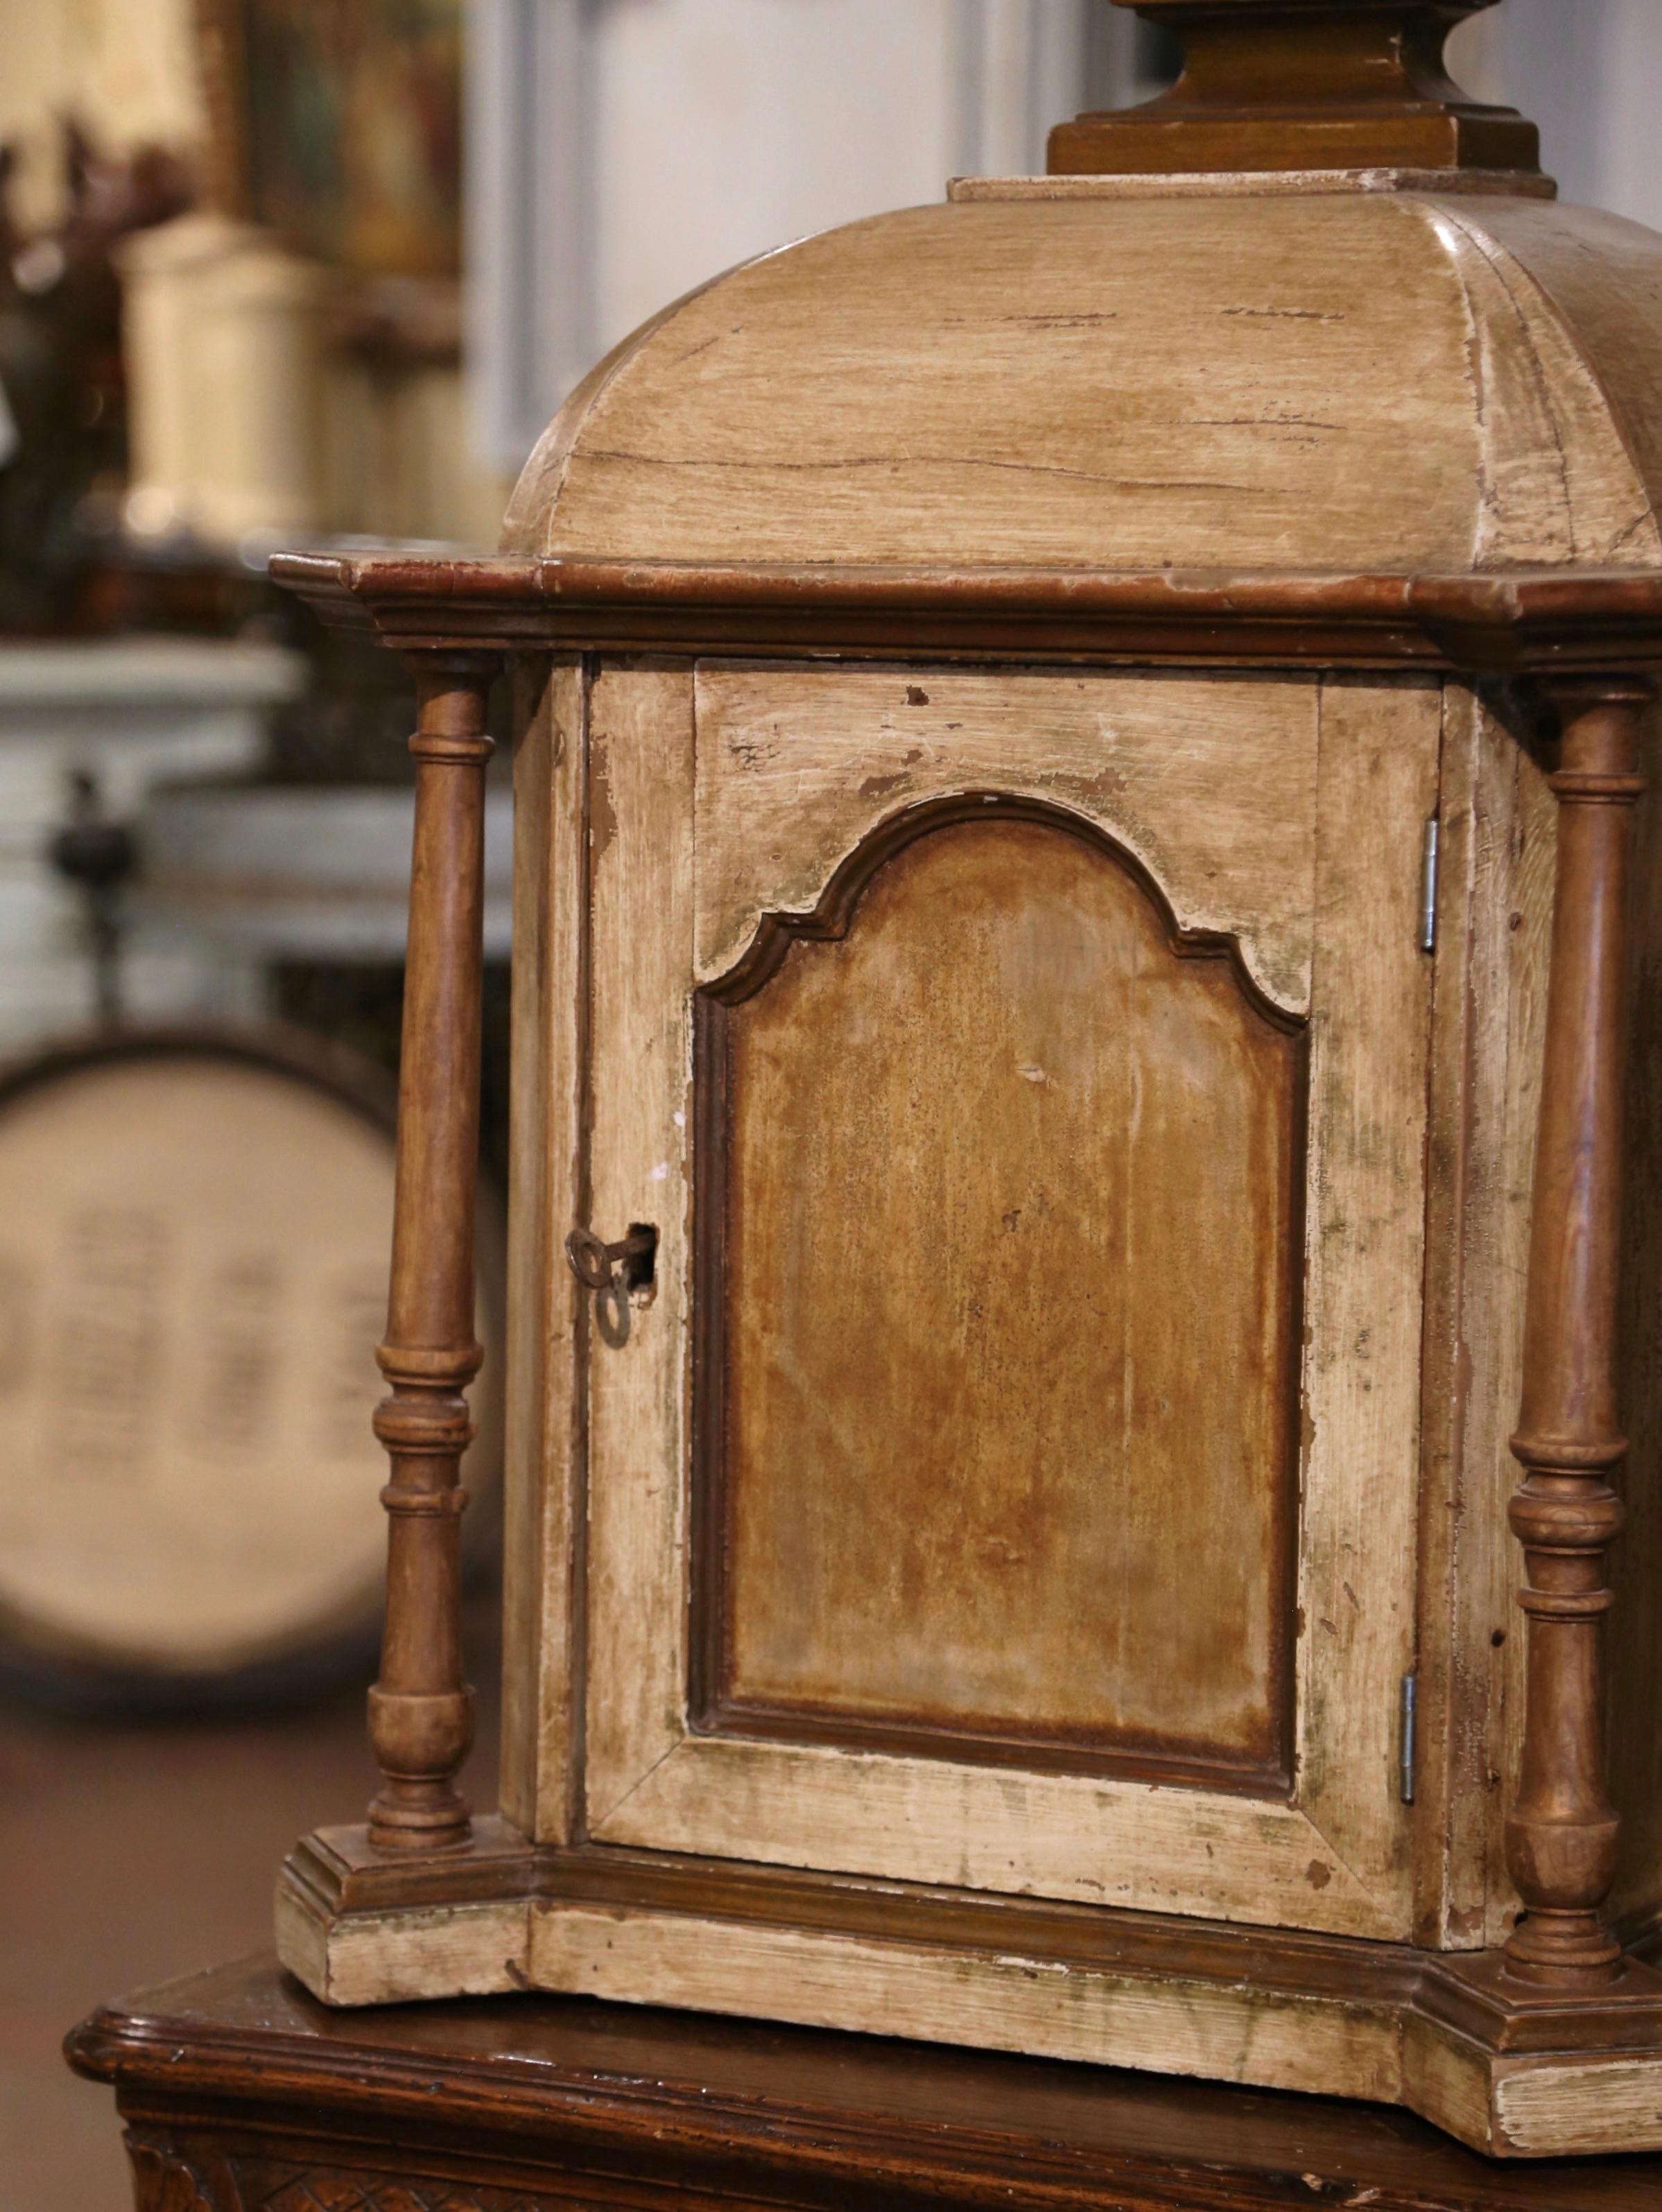 This elegant and petite antique vitrine was crafted in France, circa 1860. Originally used as a tabernacle in a church or chapel, the hanging cabinet features a dome top over a single door decorated with turned columns on each side. The door